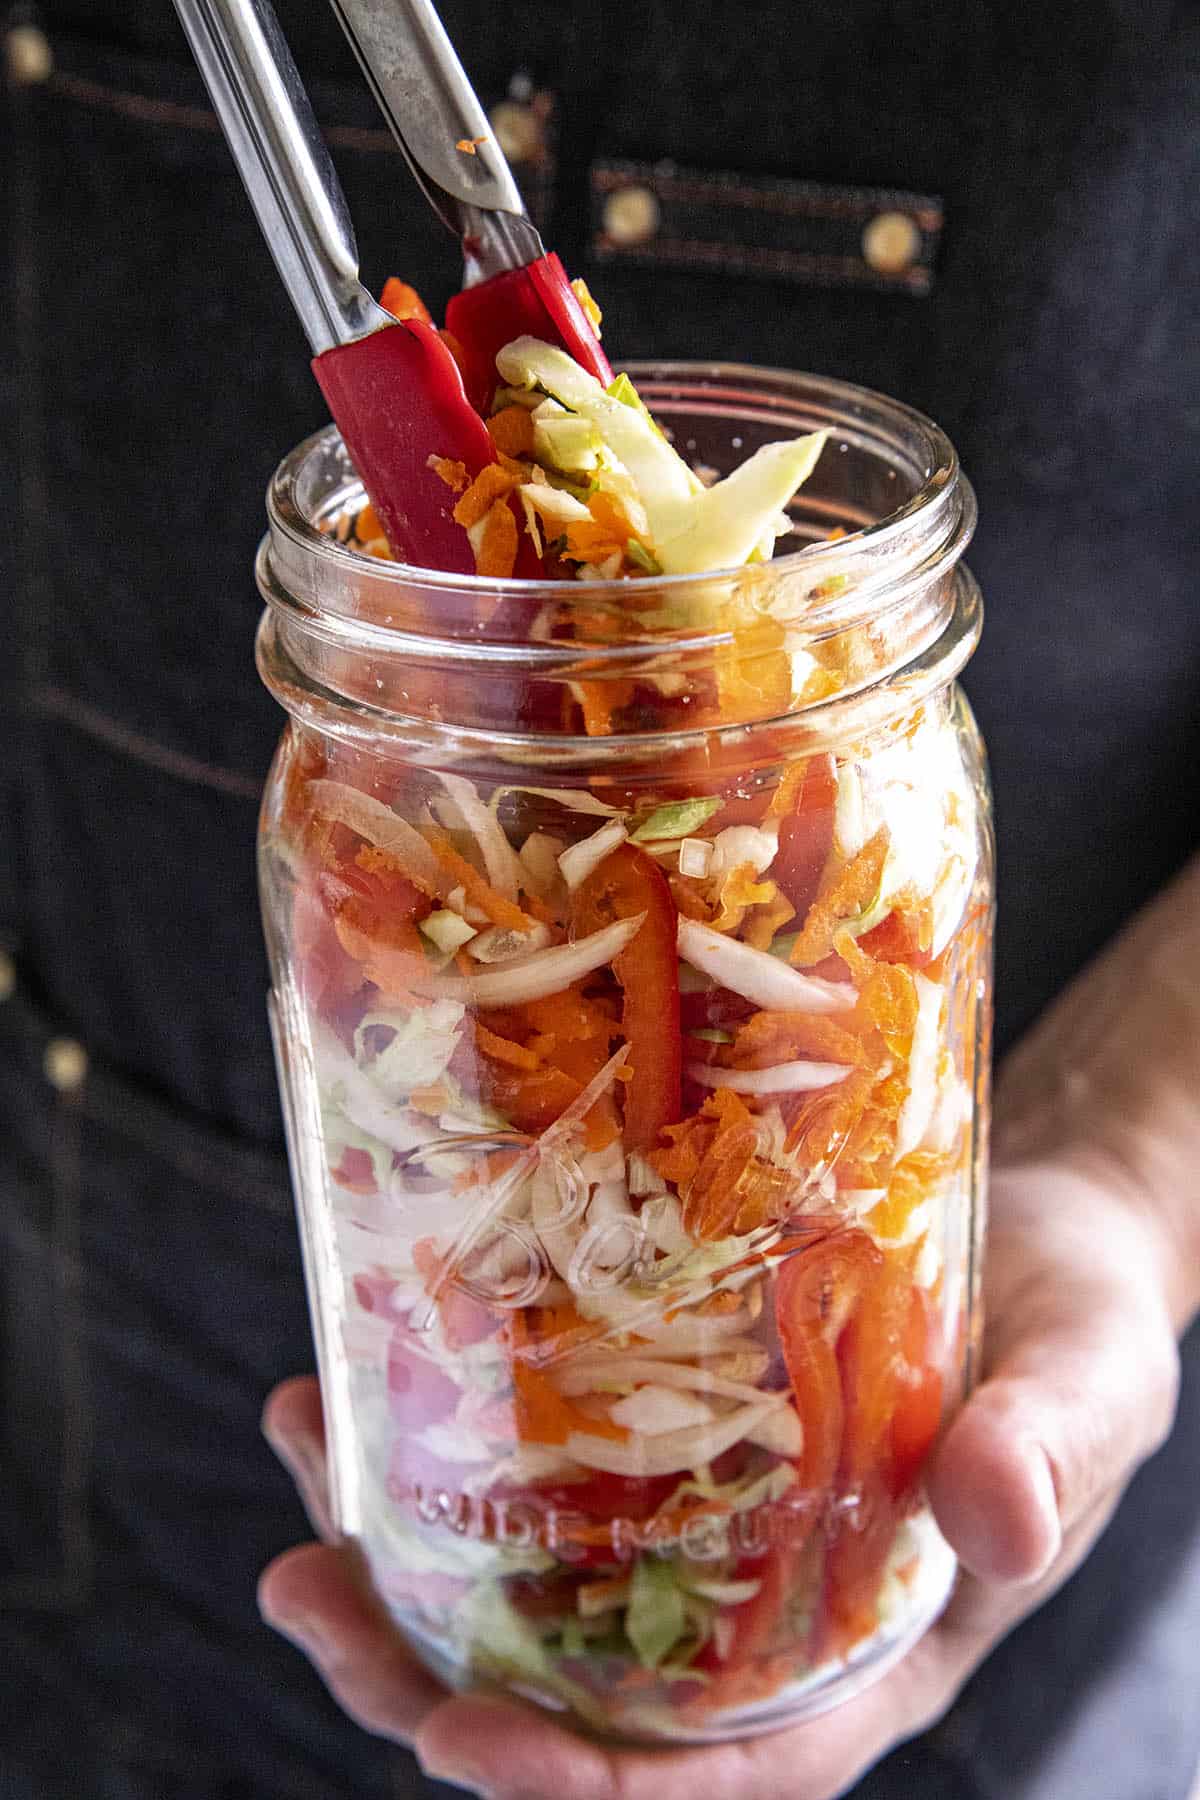 Stuffing the vegetables into the jar to make Pikliz